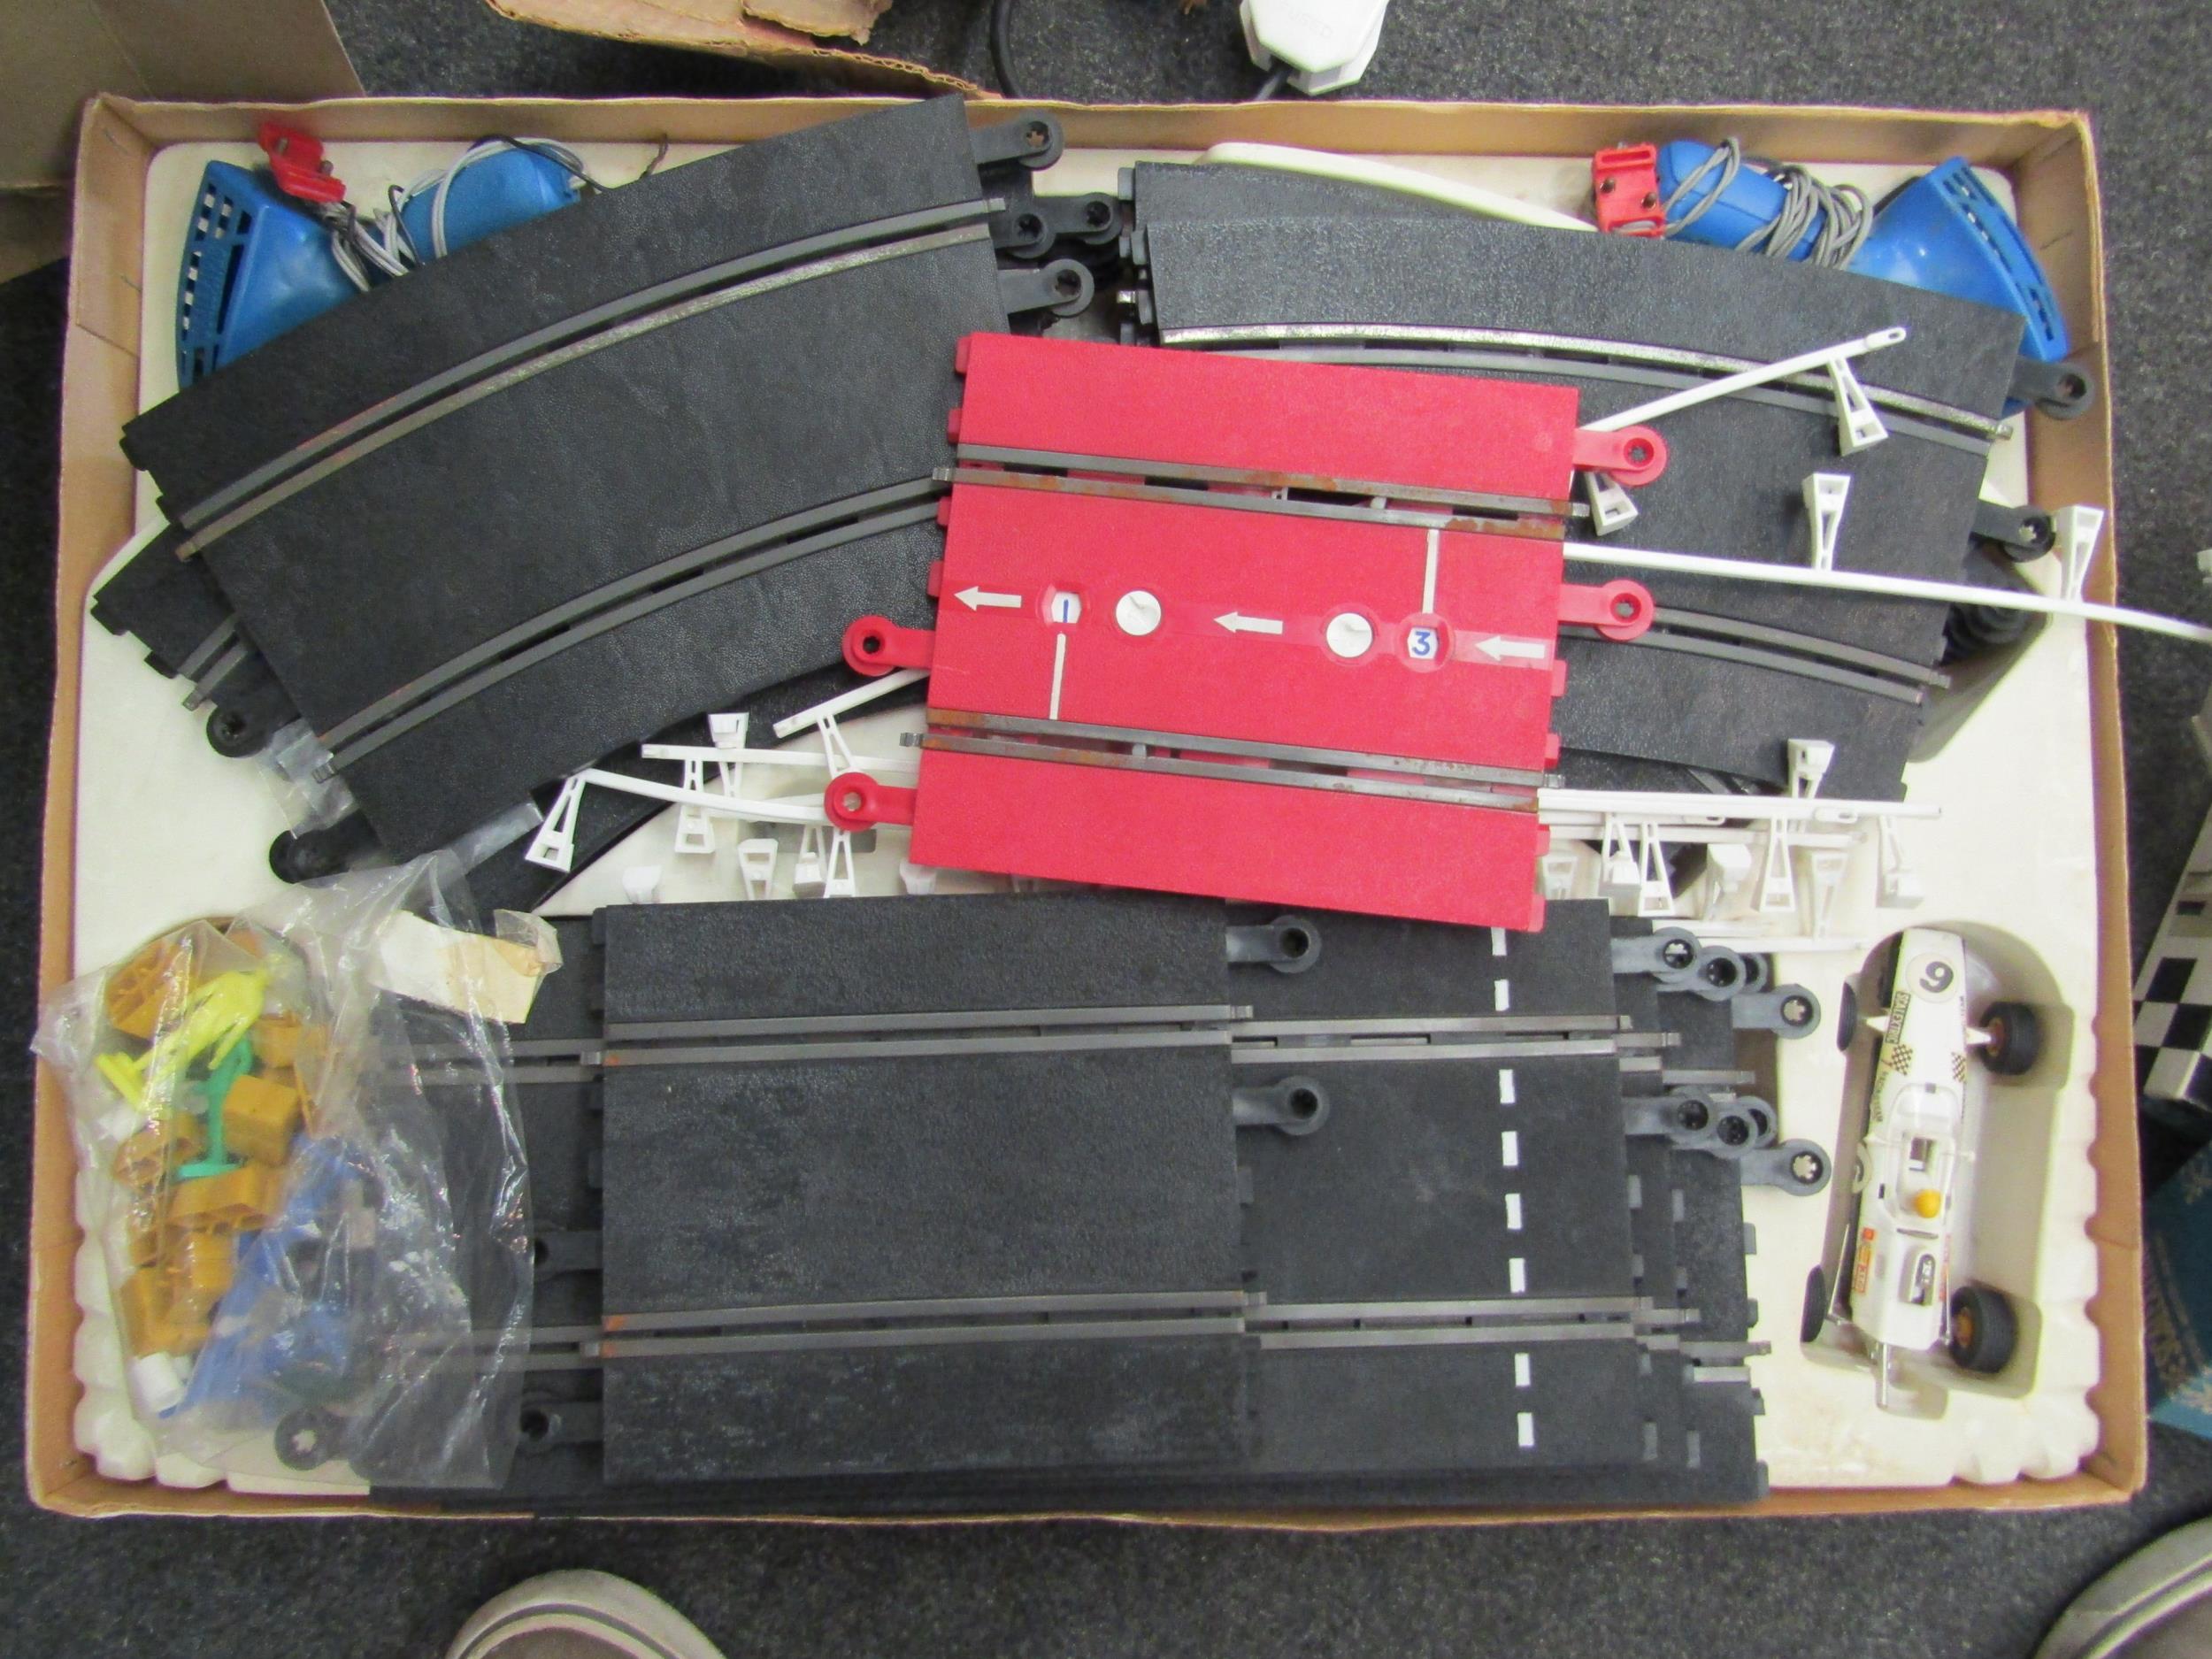 Vintage Scalextric Team Set 35 with original racing cars and accessories - Image 2 of 3